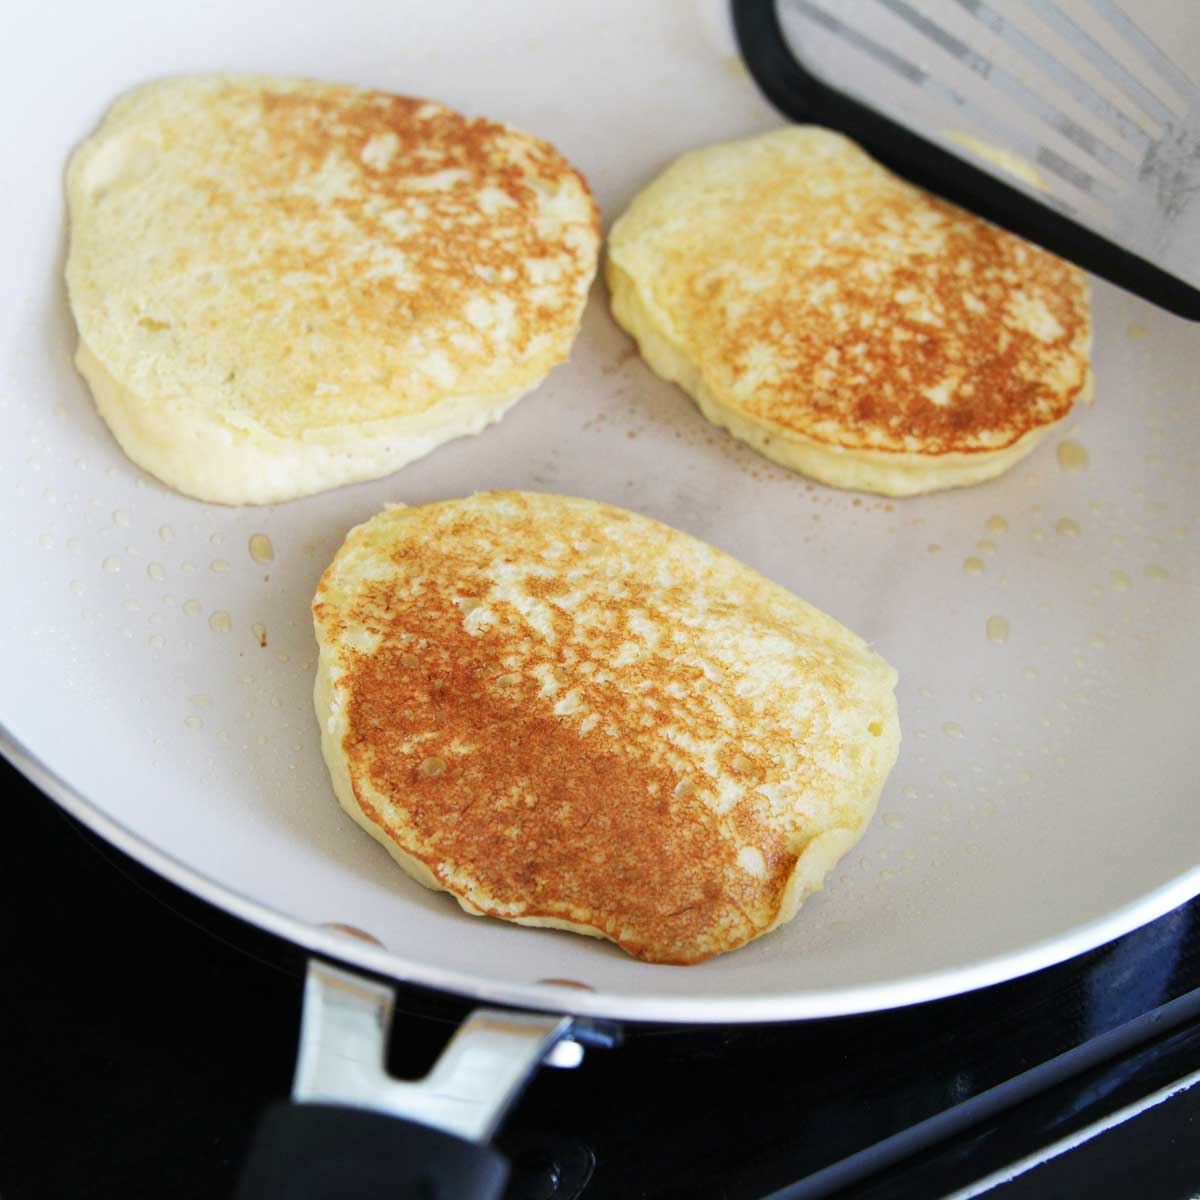 Fluffy Homemade Almond Flour Pancakes with Banana - Almond Flour Pancakes